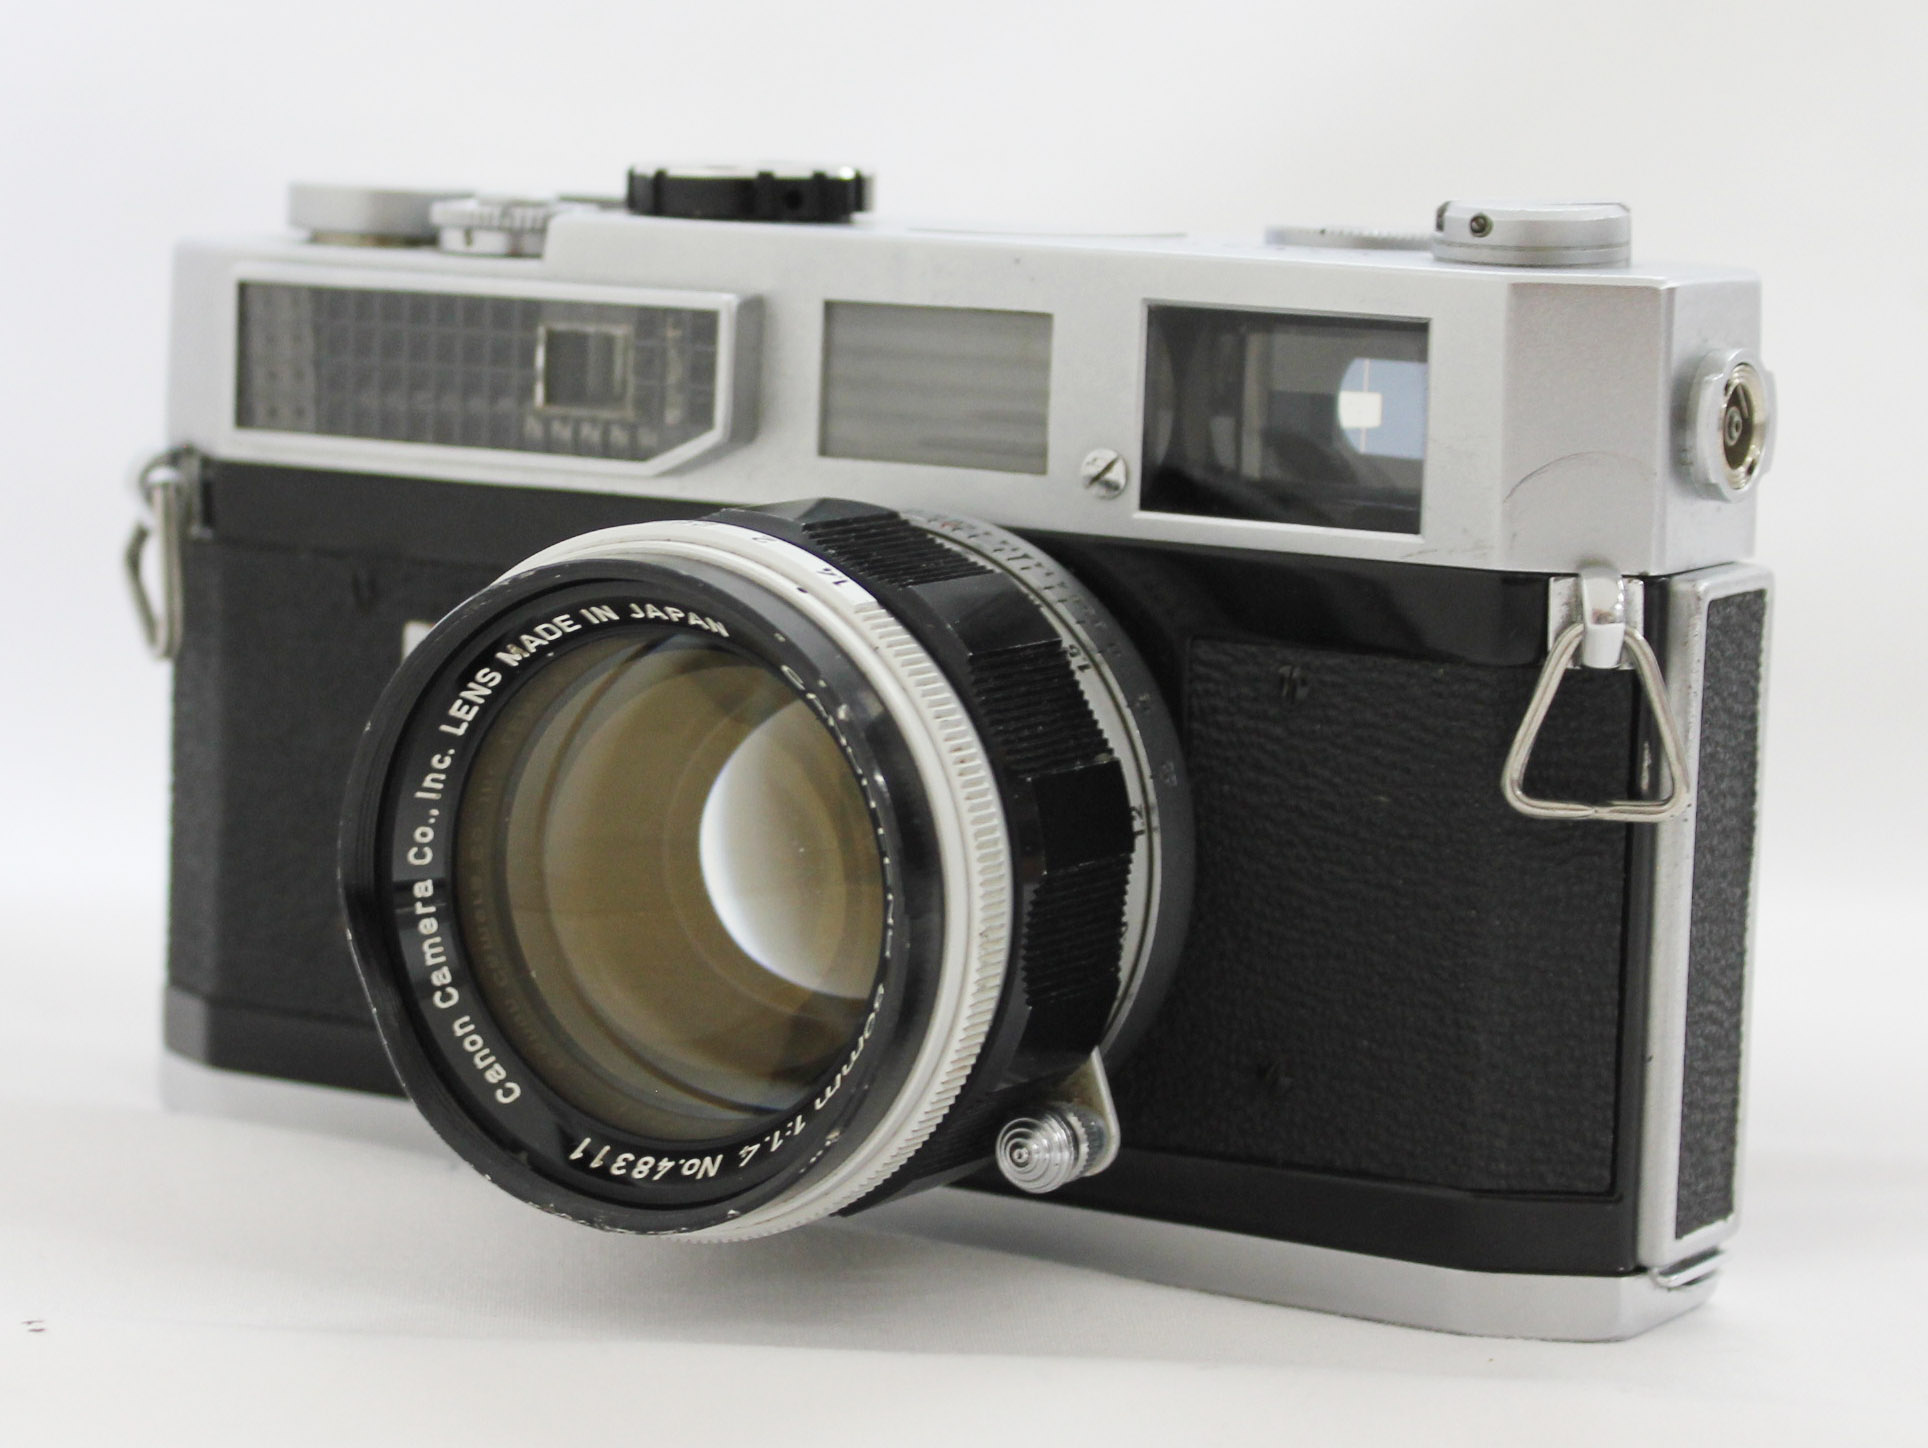 Japan Used Camera Shop | Canon Model 7 Rangefinder Camera with 50mm F/1.4 Leica L39 Mount Lens from Japan